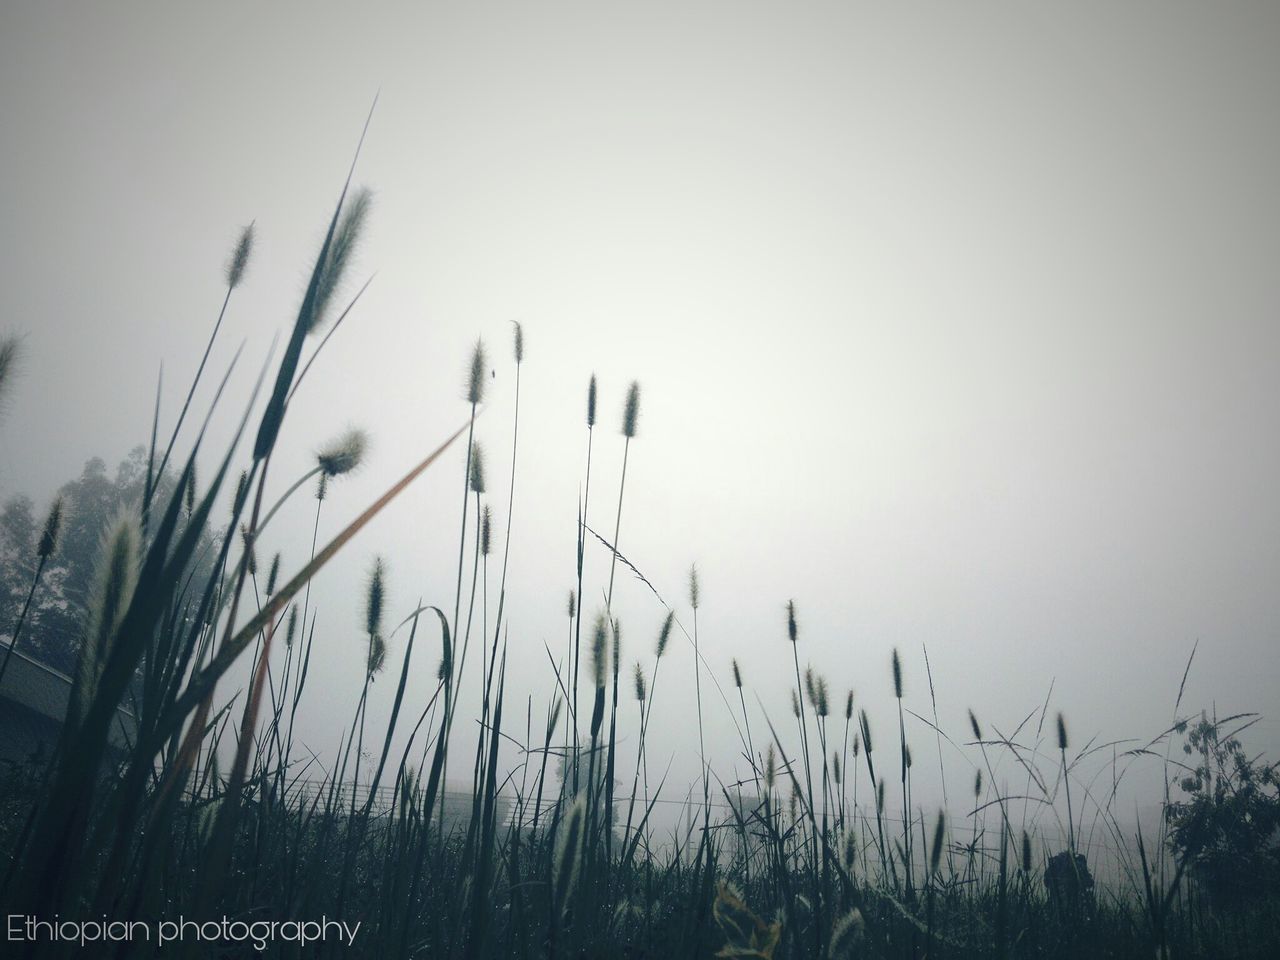 plant, growth, sky, tranquility, beauty in nature, nature, field, land, no people, grass, day, close-up, focus on foreground, tranquil scene, outdoors, clear sky, low angle view, selective focus, timothy grass, stalk